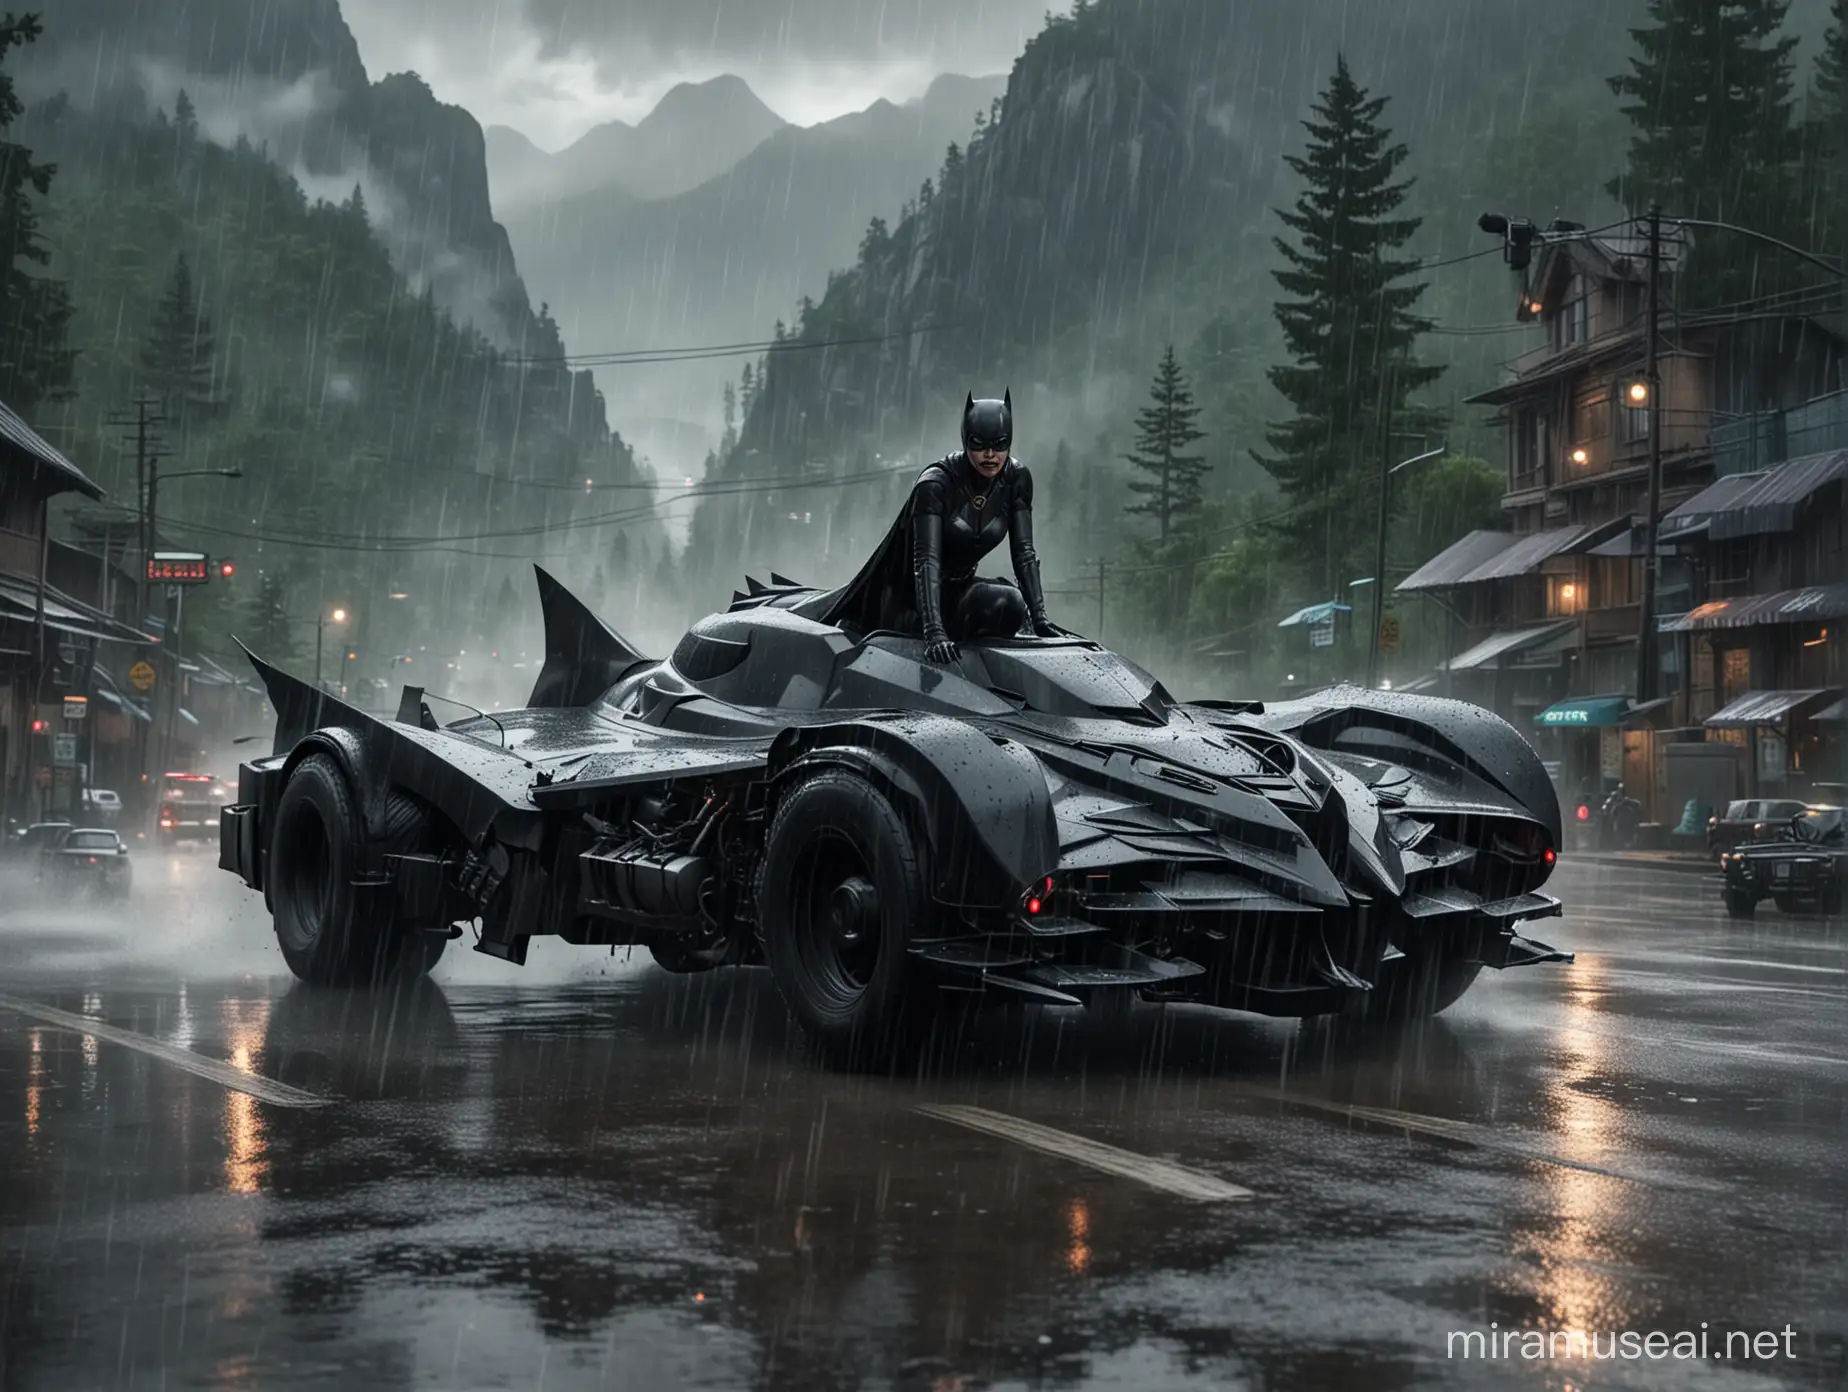 A Batmobile and an drives on the road in heavy rain, Catwoman is sitting on the roof of the batmobile. The background is forested mountainous terrain, with a high-definition photographic style, a wide-angle lens perspective, and dynamic lighting effects